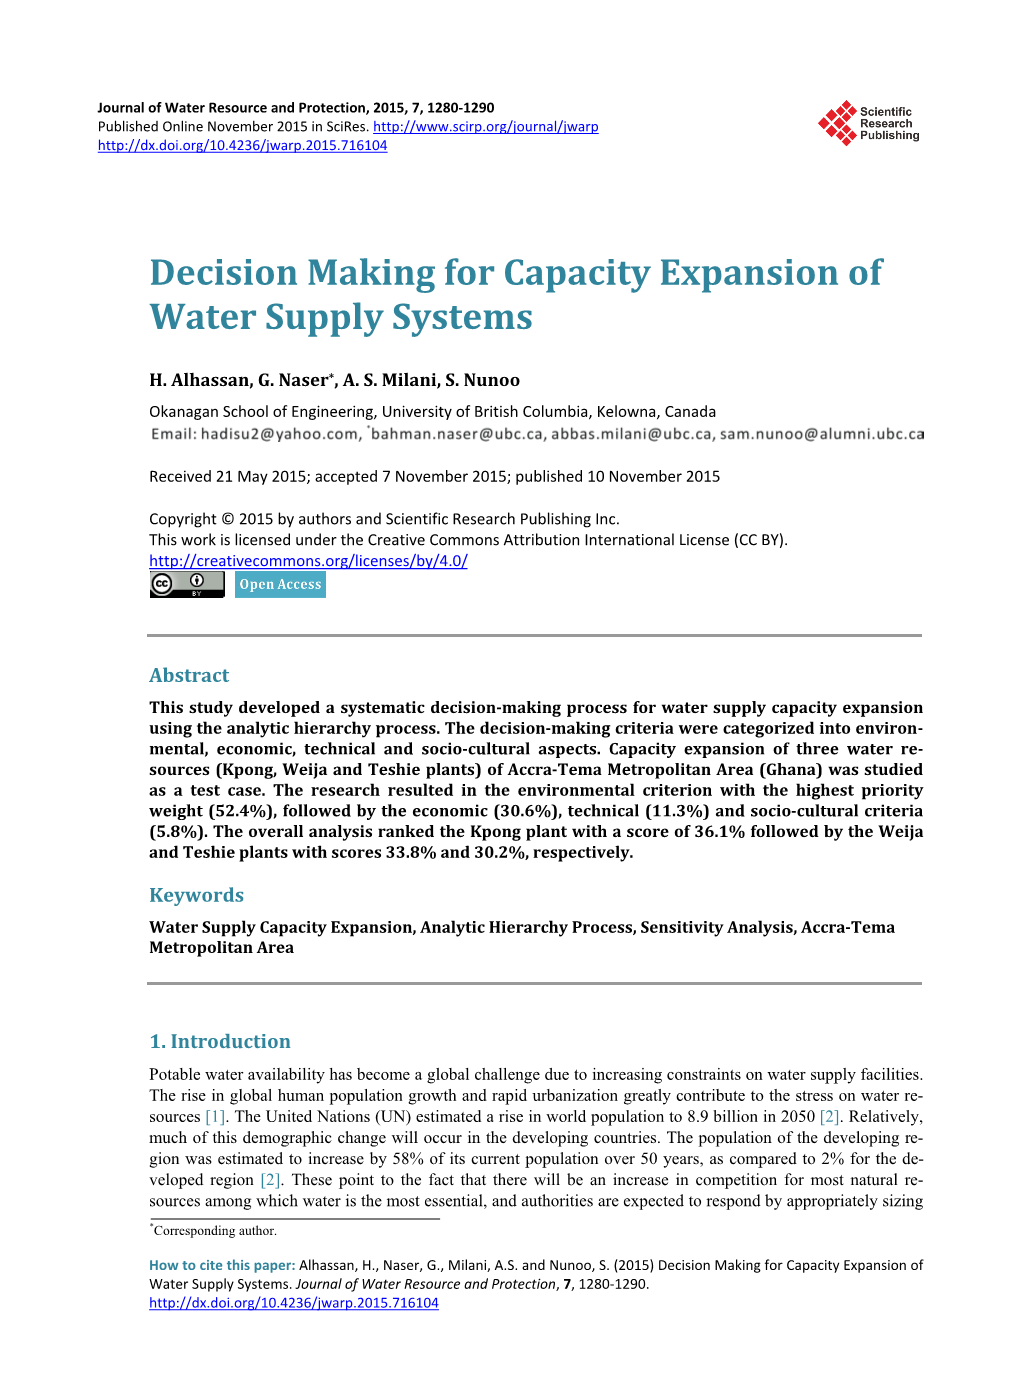 Decision Making for Capacity Expansion of Water Supply Systems